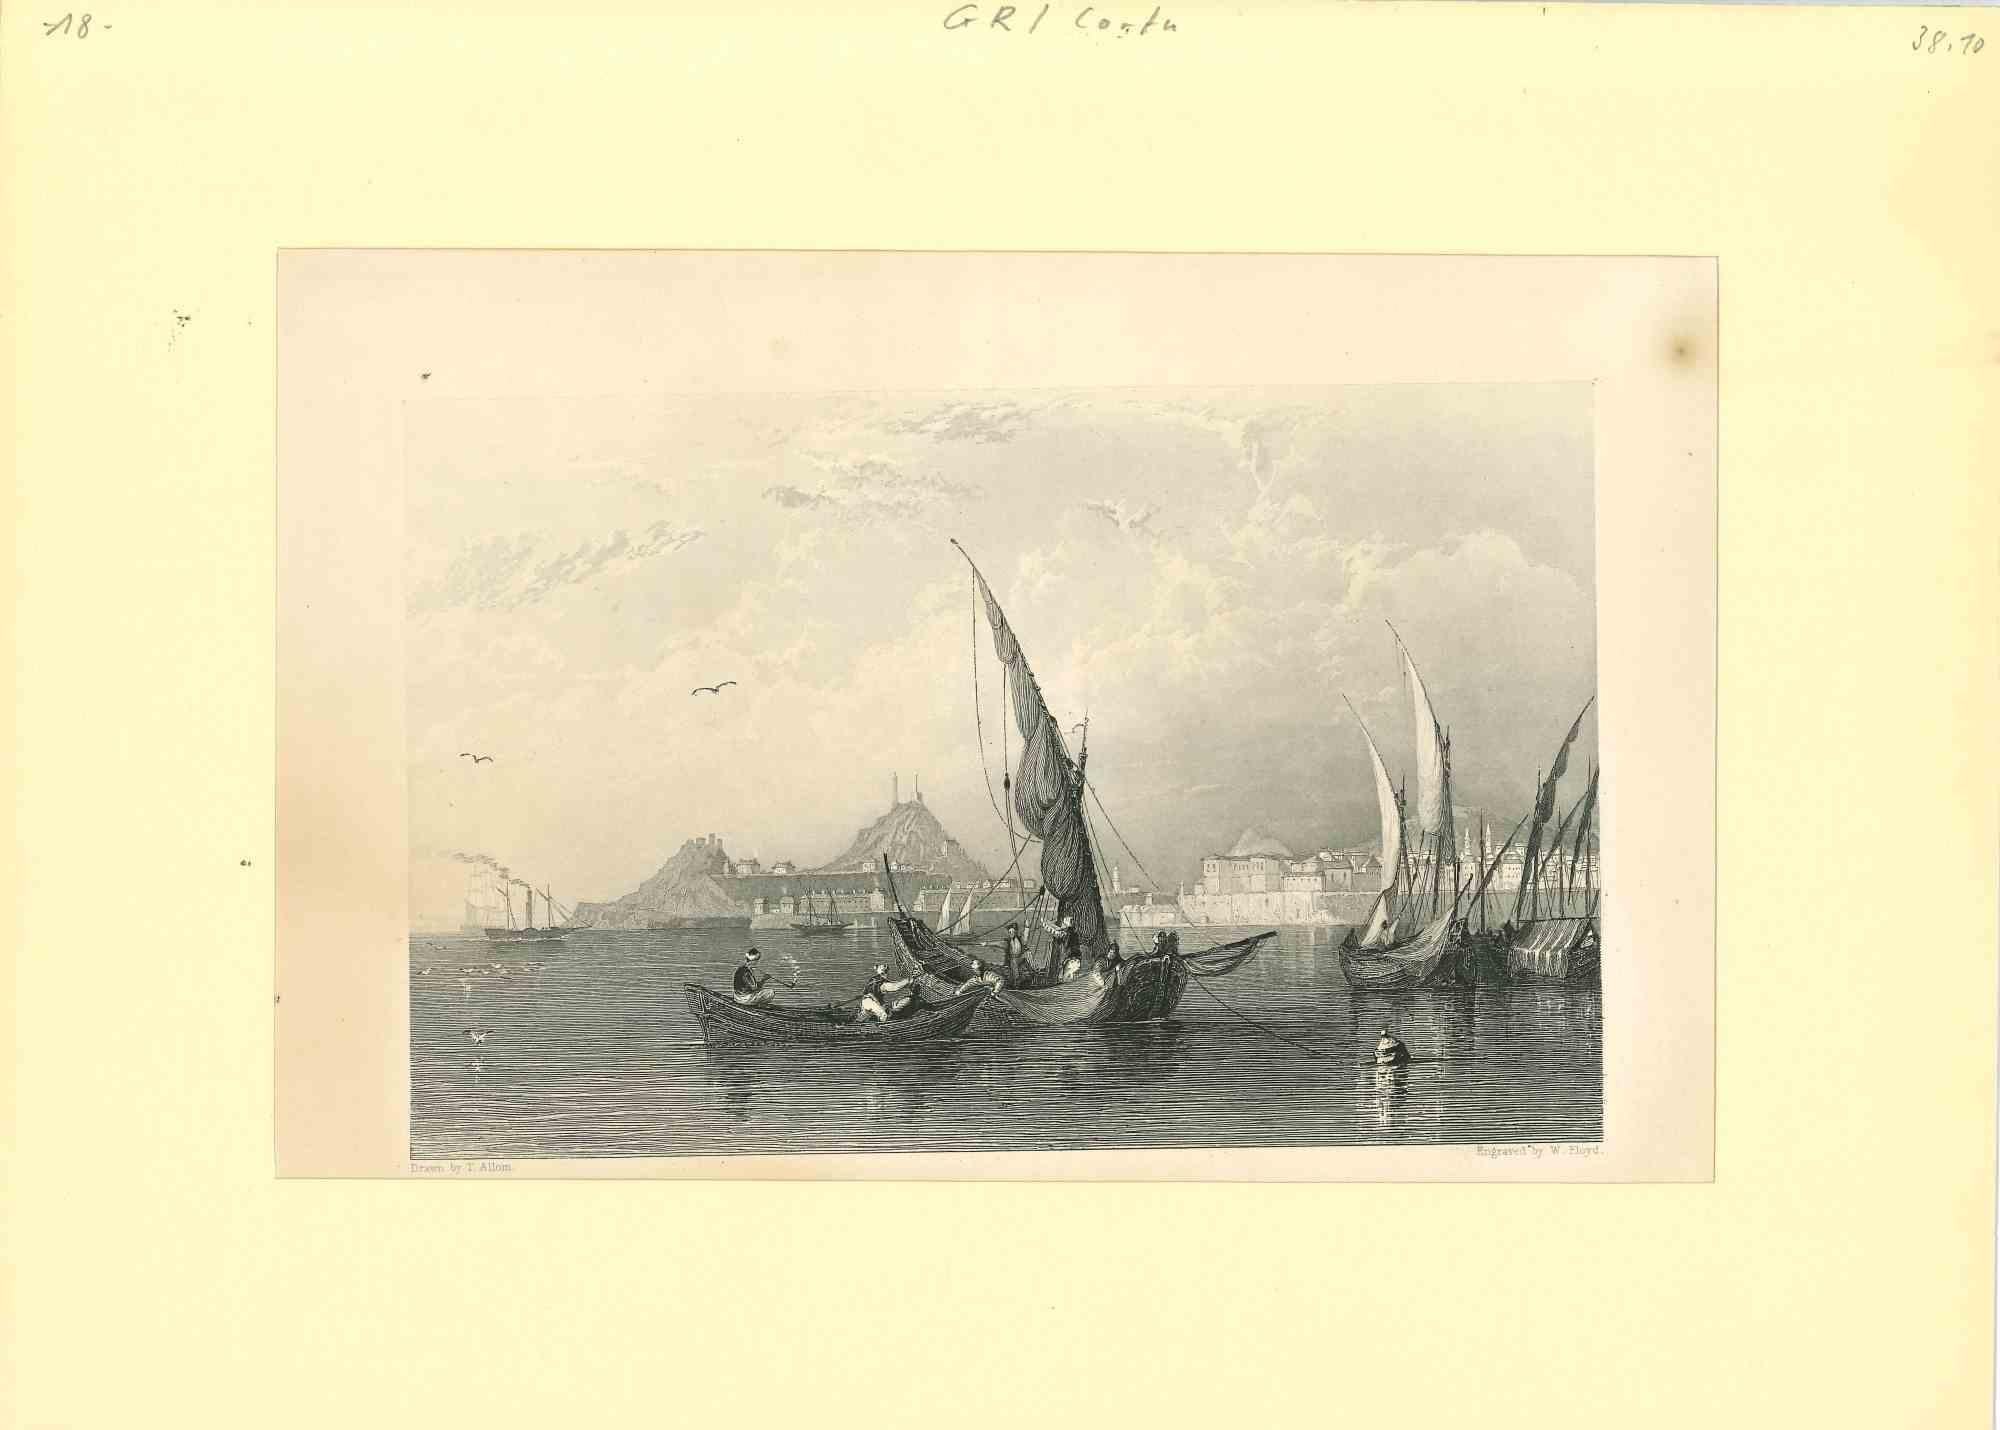 Unknown Landscape Print - Ancient View of Corfu - Original Lithograph - Mid-19th Century